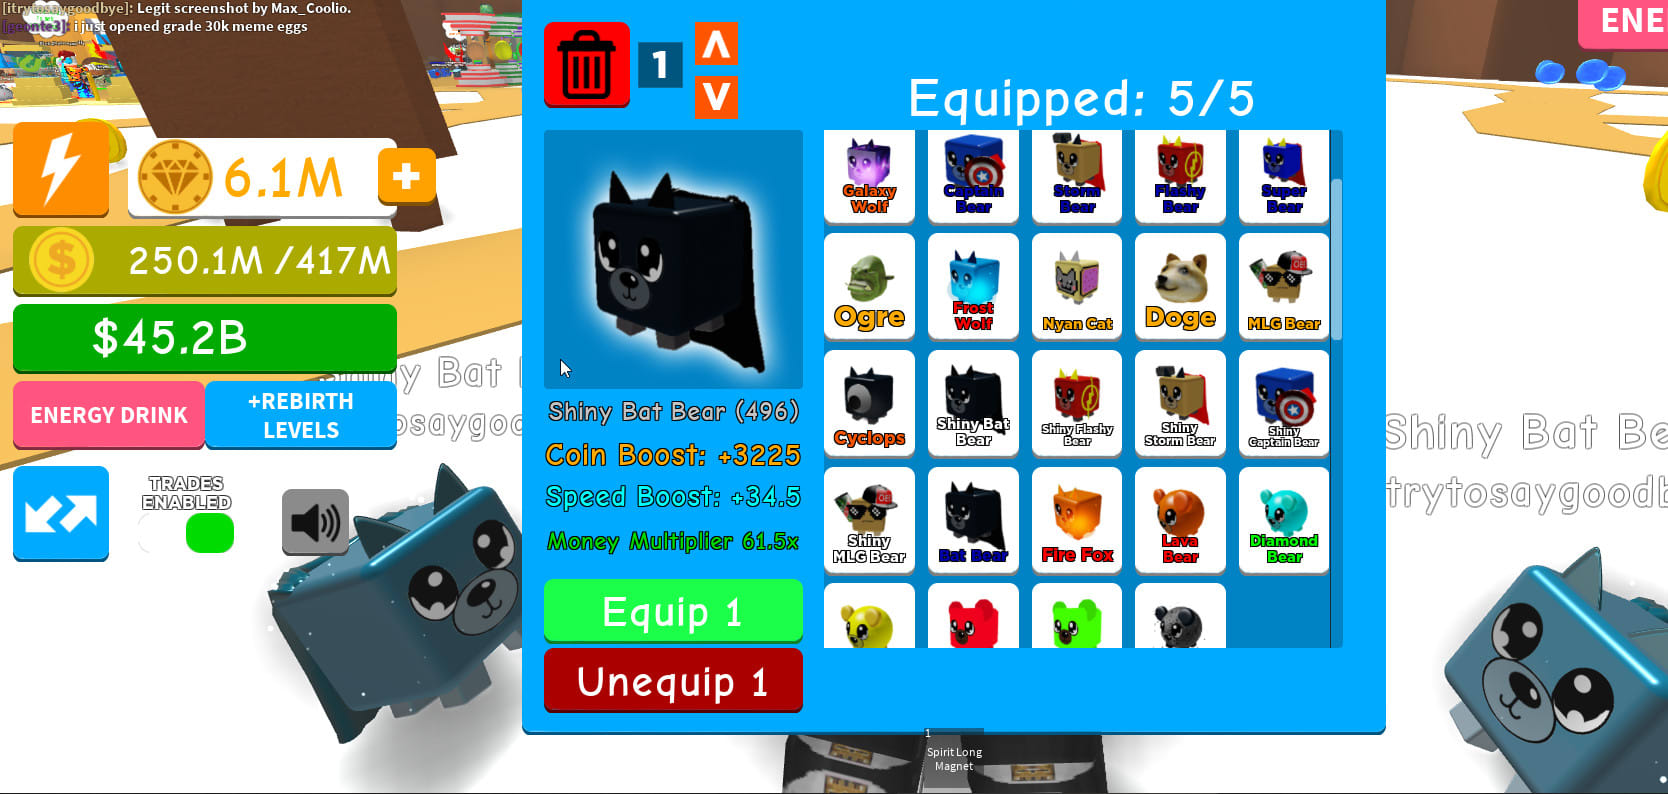 Sell You The Best Pet In Magnet Simulator For Cheap By Max Coolio - magnet simulator roblox rebirth